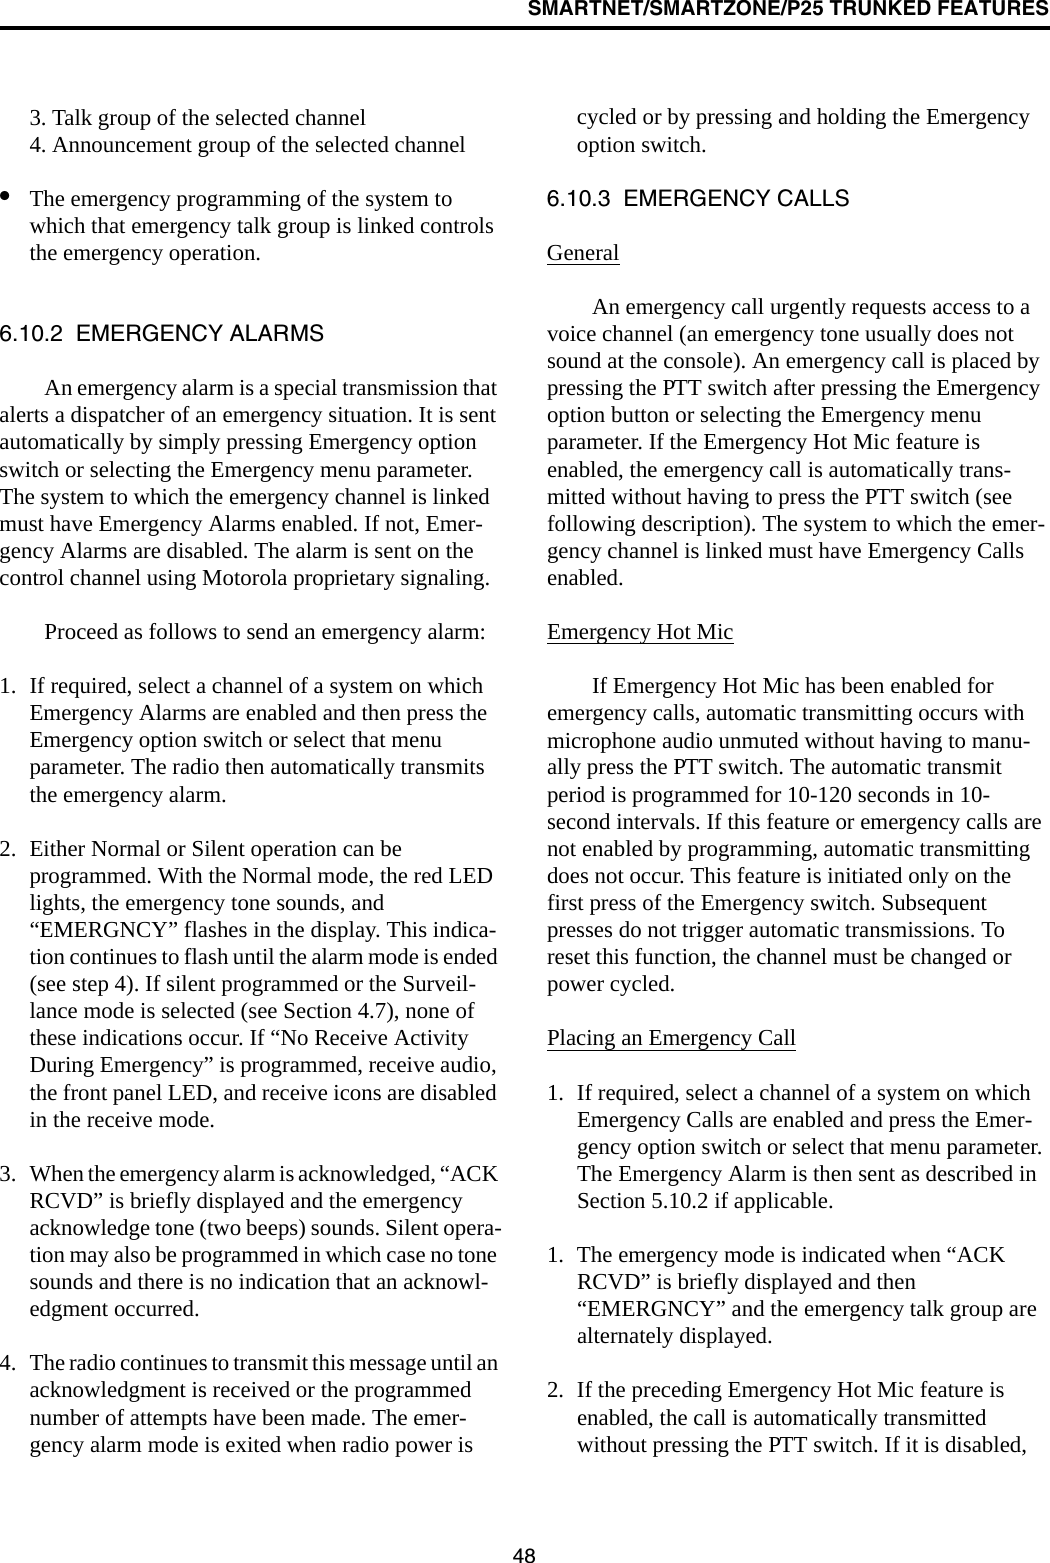 SMARTNET/SMARTZONE/P25 TRUNKED FEATURES483. Talk group of the selected channel4. Announcement group of the selected channel•The emergency programming of the system to which that emergency talk group is linked controls the emergency operation.6.10.2  EMERGENCY ALARMSAn emergency alarm is a special transmission that alerts a dispatcher of an emergency situation. It is sent automatically by simply pressing Emergency option switch or selecting the Emergency menu parameter. The system to which the emergency channel is linked must have Emergency Alarms enabled. If not, Emer-gency Alarms are disabled. The alarm is sent on the control channel using Motorola proprietary signaling.Proceed as follows to send an emergency alarm: 1. If required, select a channel of a system on which Emergency Alarms are enabled and then press the Emergency option switch or select that menu parameter. The radio then automatically transmits the emergency alarm.2. Either Normal or Silent operation can be programmed. With the Normal mode, the red LED lights, the emergency tone sounds, and “EMERGNCY” flashes in the display. This indica-tion continues to flash until the alarm mode is ended (see step 4). If silent programmed or the Surveil-lance mode is selected (see Section 4.7), none of these indications occur. If “No Receive Activity During Emergency” is programmed, receive audio, the front panel LED, and receive icons are disabled in the receive mode.3. When the emergency alarm is acknowledged, “ACK RCVD” is briefly displayed and the emergency acknowledge tone (two beeps) sounds. Silent opera-tion may also be programmed in which case no tone sounds and there is no indication that an acknowl-edgment occurred.4. The radio continues to transmit this message until an acknowledgment is received or the programmed number of attempts have been made. The emer-gency alarm mode is exited when radio power is cycled or by pressing and holding the Emergency option switch. 6.10.3  EMERGENCY CALLSGeneralAn emergency call urgently requests access to a voice channel (an emergency tone usually does not sound at the console). An emergency call is placed by pressing the PTT switch after pressing the Emergency option button or selecting the Emergency menu parameter. If the Emergency Hot Mic feature is enabled, the emergency call is automatically trans-mitted without having to press the PTT switch (see following description). The system to which the emer-gency channel is linked must have Emergency Calls enabled.Emergency Hot MicIf Emergency Hot Mic has been enabled for emergency calls, automatic transmitting occurs with microphone audio unmuted without having to manu-ally press the PTT switch. The automatic transmit period is programmed for 10-120 seconds in 10-second intervals. If this feature or emergency calls are not enabled by programming, automatic transmitting does not occur. This feature is initiated only on the first press of the Emergency switch. Subsequent presses do not trigger automatic transmissions. To reset this function, the channel must be changed or power cycled.Placing an Emergency Call1. If required, select a channel of a system on which Emergency Calls are enabled and press the Emer-gency option switch or select that menu parameter. The Emergency Alarm is then sent as described in Section 5.10.2 if applicable.1. The emergency mode is indicated when “ACK RCVD” is briefly displayed and then “EMERGNCY” and the emergency talk group are alternately displayed. 2. If the preceding Emergency Hot Mic feature is enabled, the call is automatically transmitted without pressing the PTT switch. If it is disabled, 